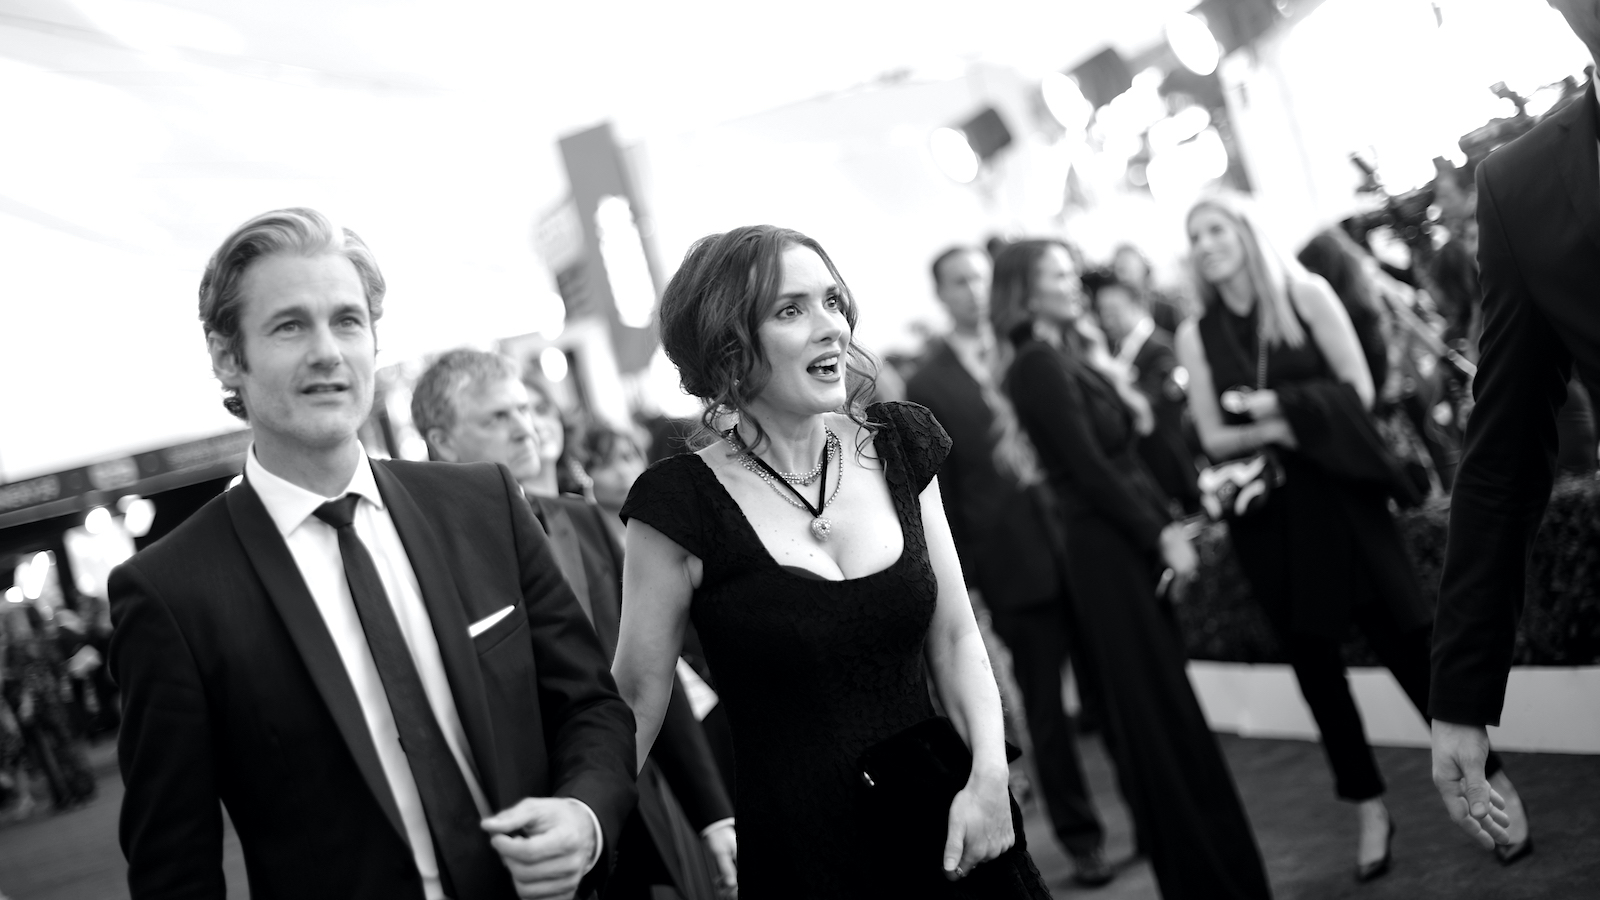 Winona Ryder Scott Mackinlay Hahn The 23rd Annual Screen Actors Guild Awards - Red Carpet